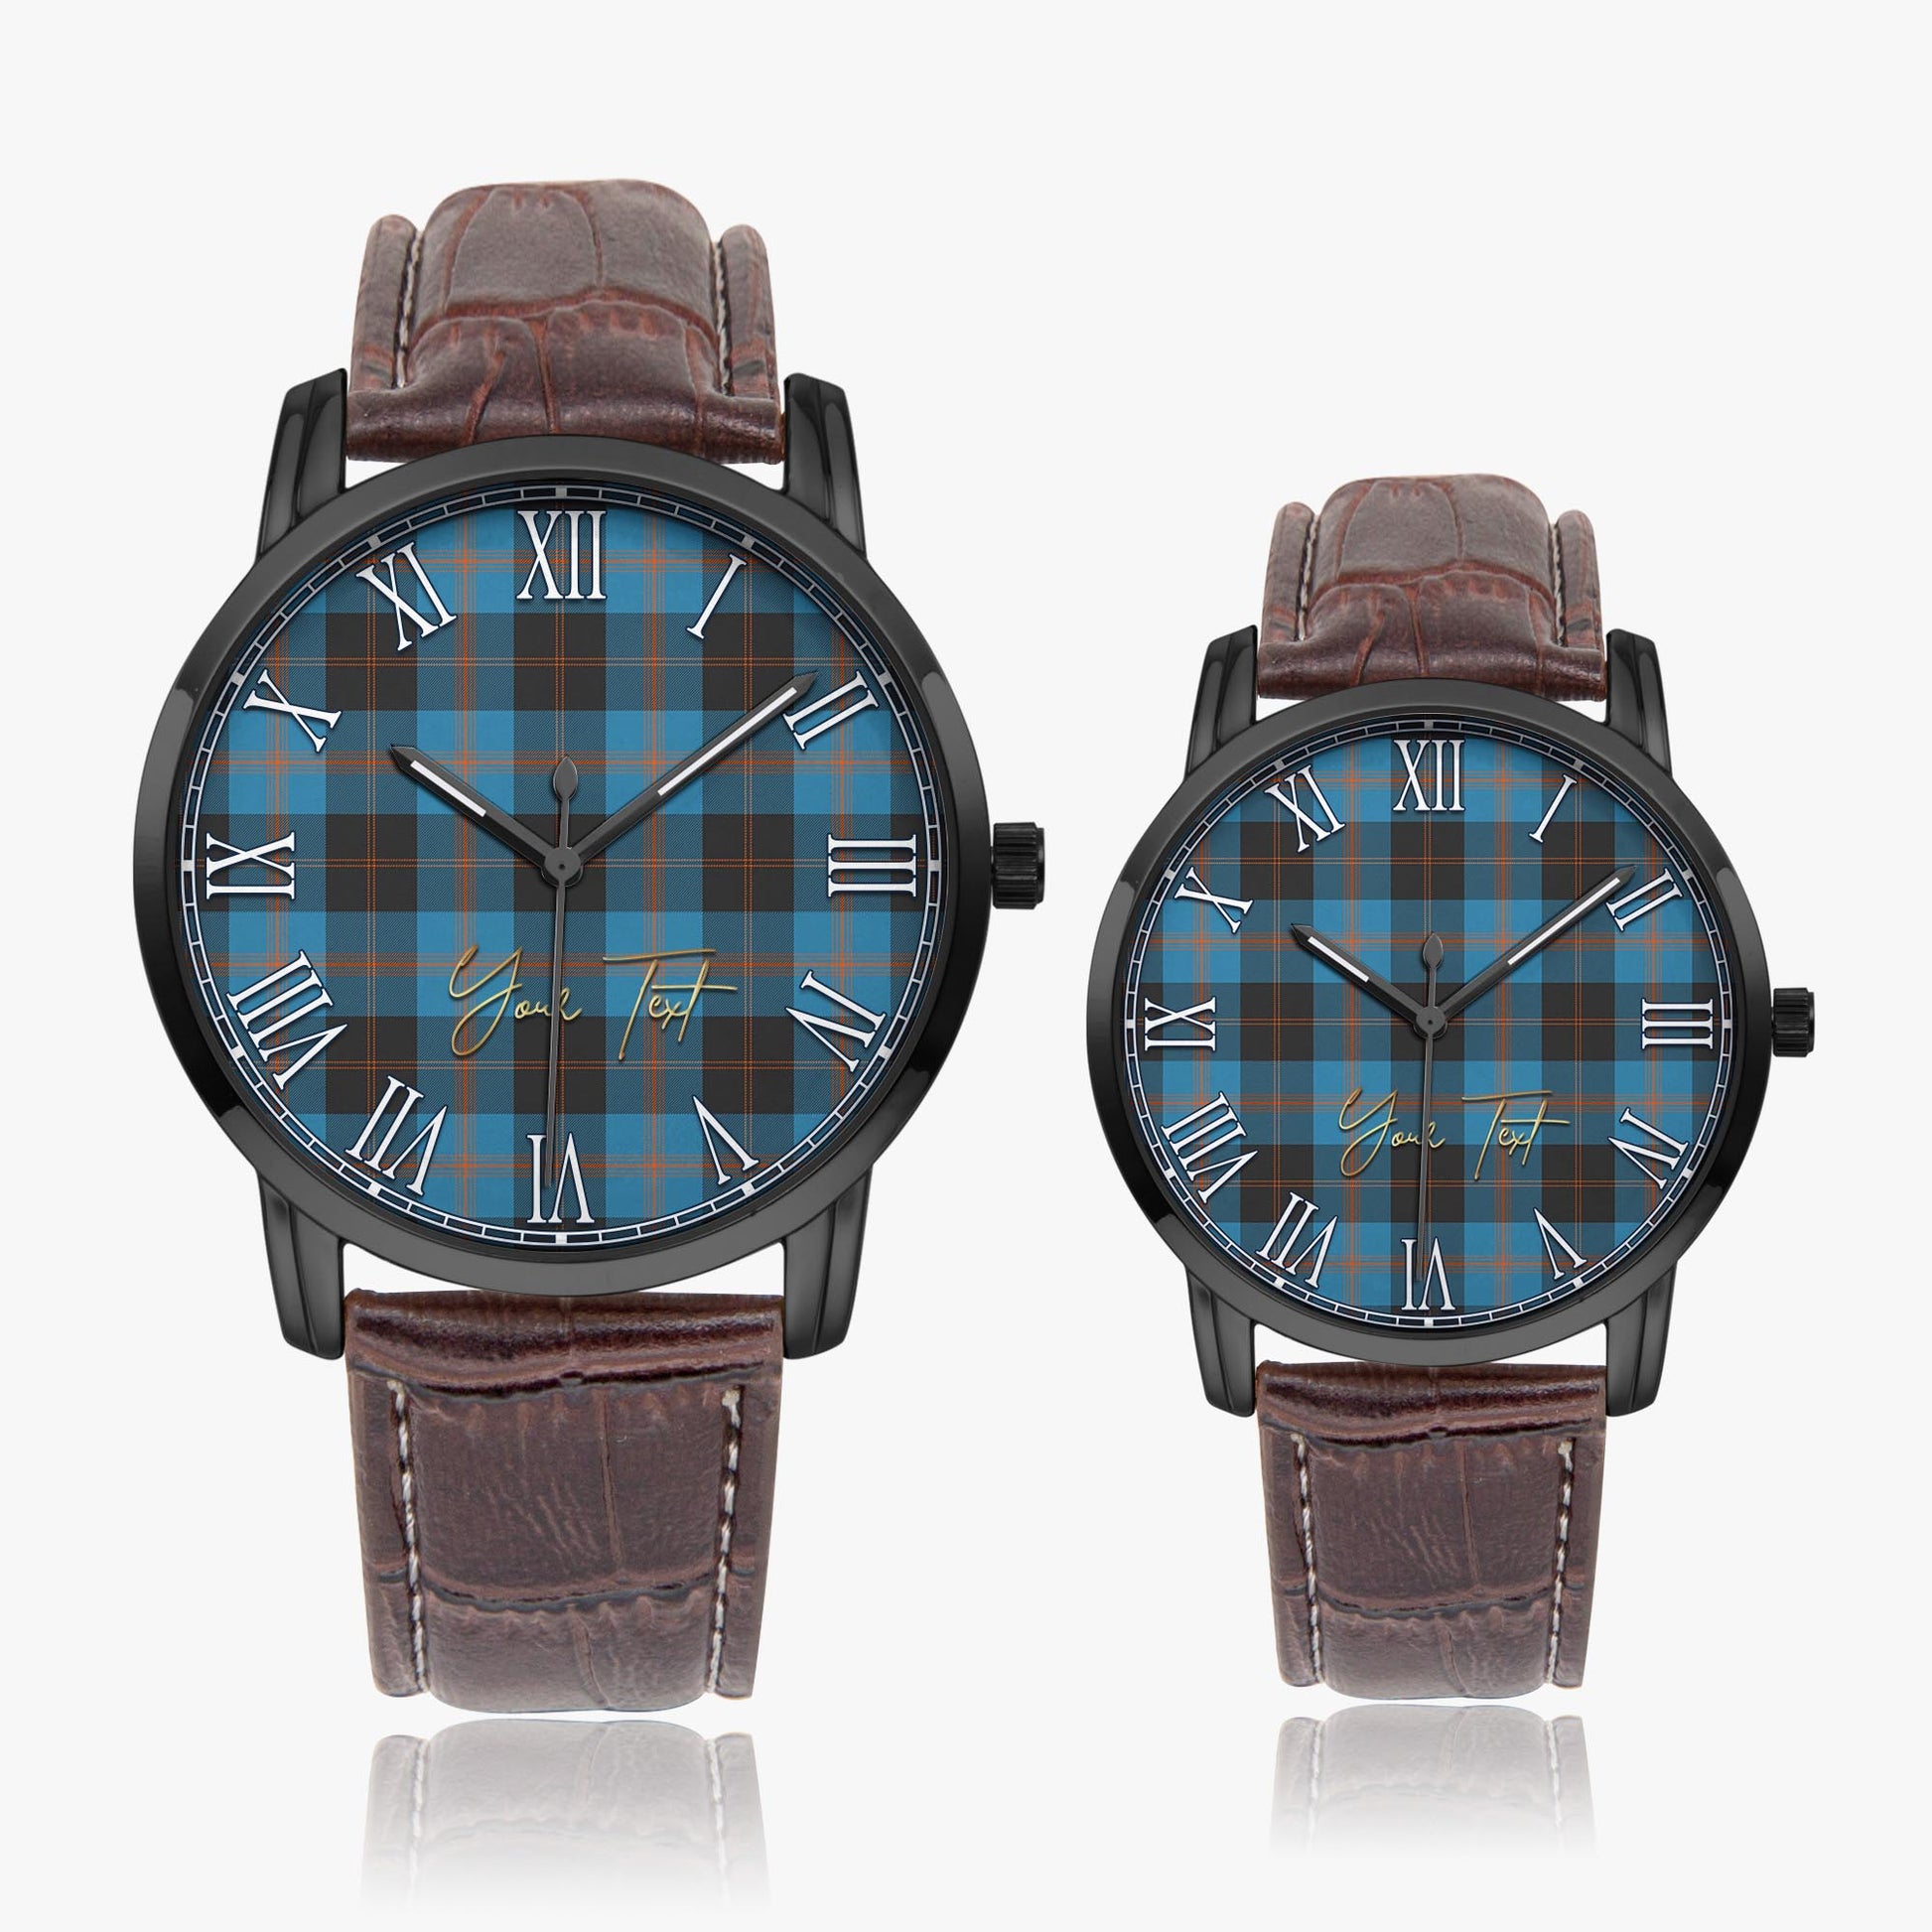 Garden Tartan Personalized Your Text Leather Trap Quartz Watch Wide Type Black Case With Brown Leather Strap - Tartanvibesclothing